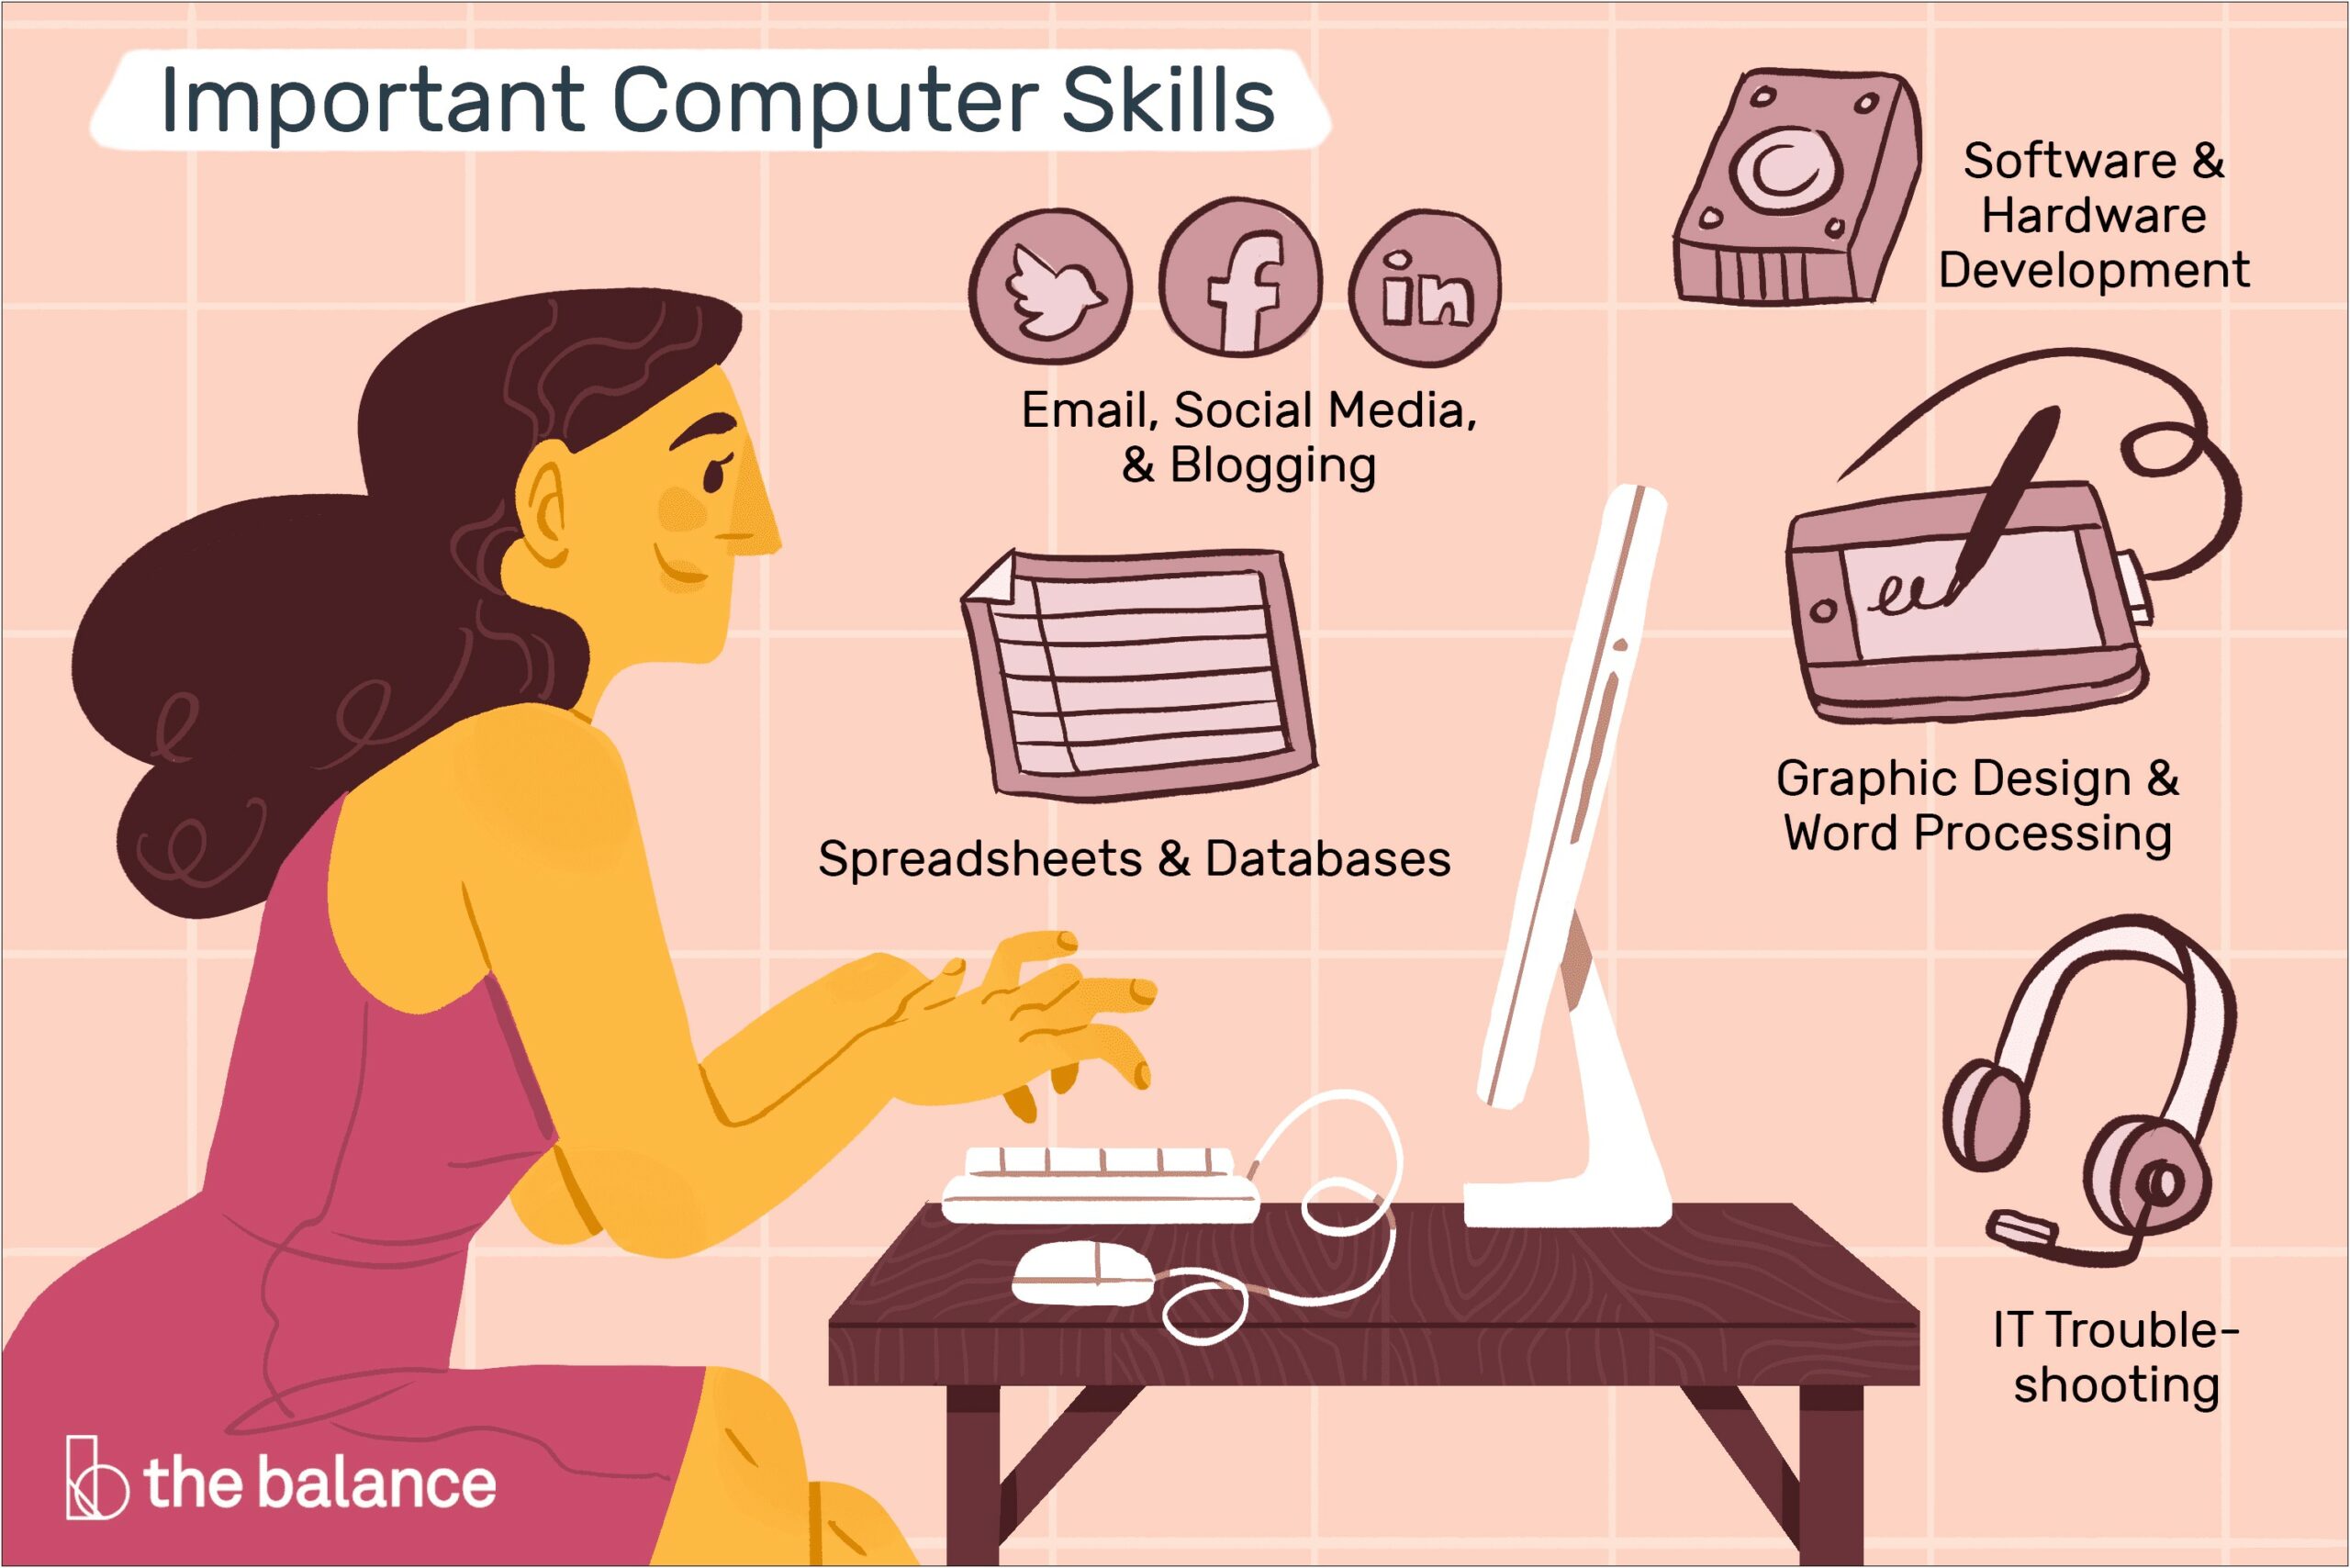 Software Skills To Add To Resume